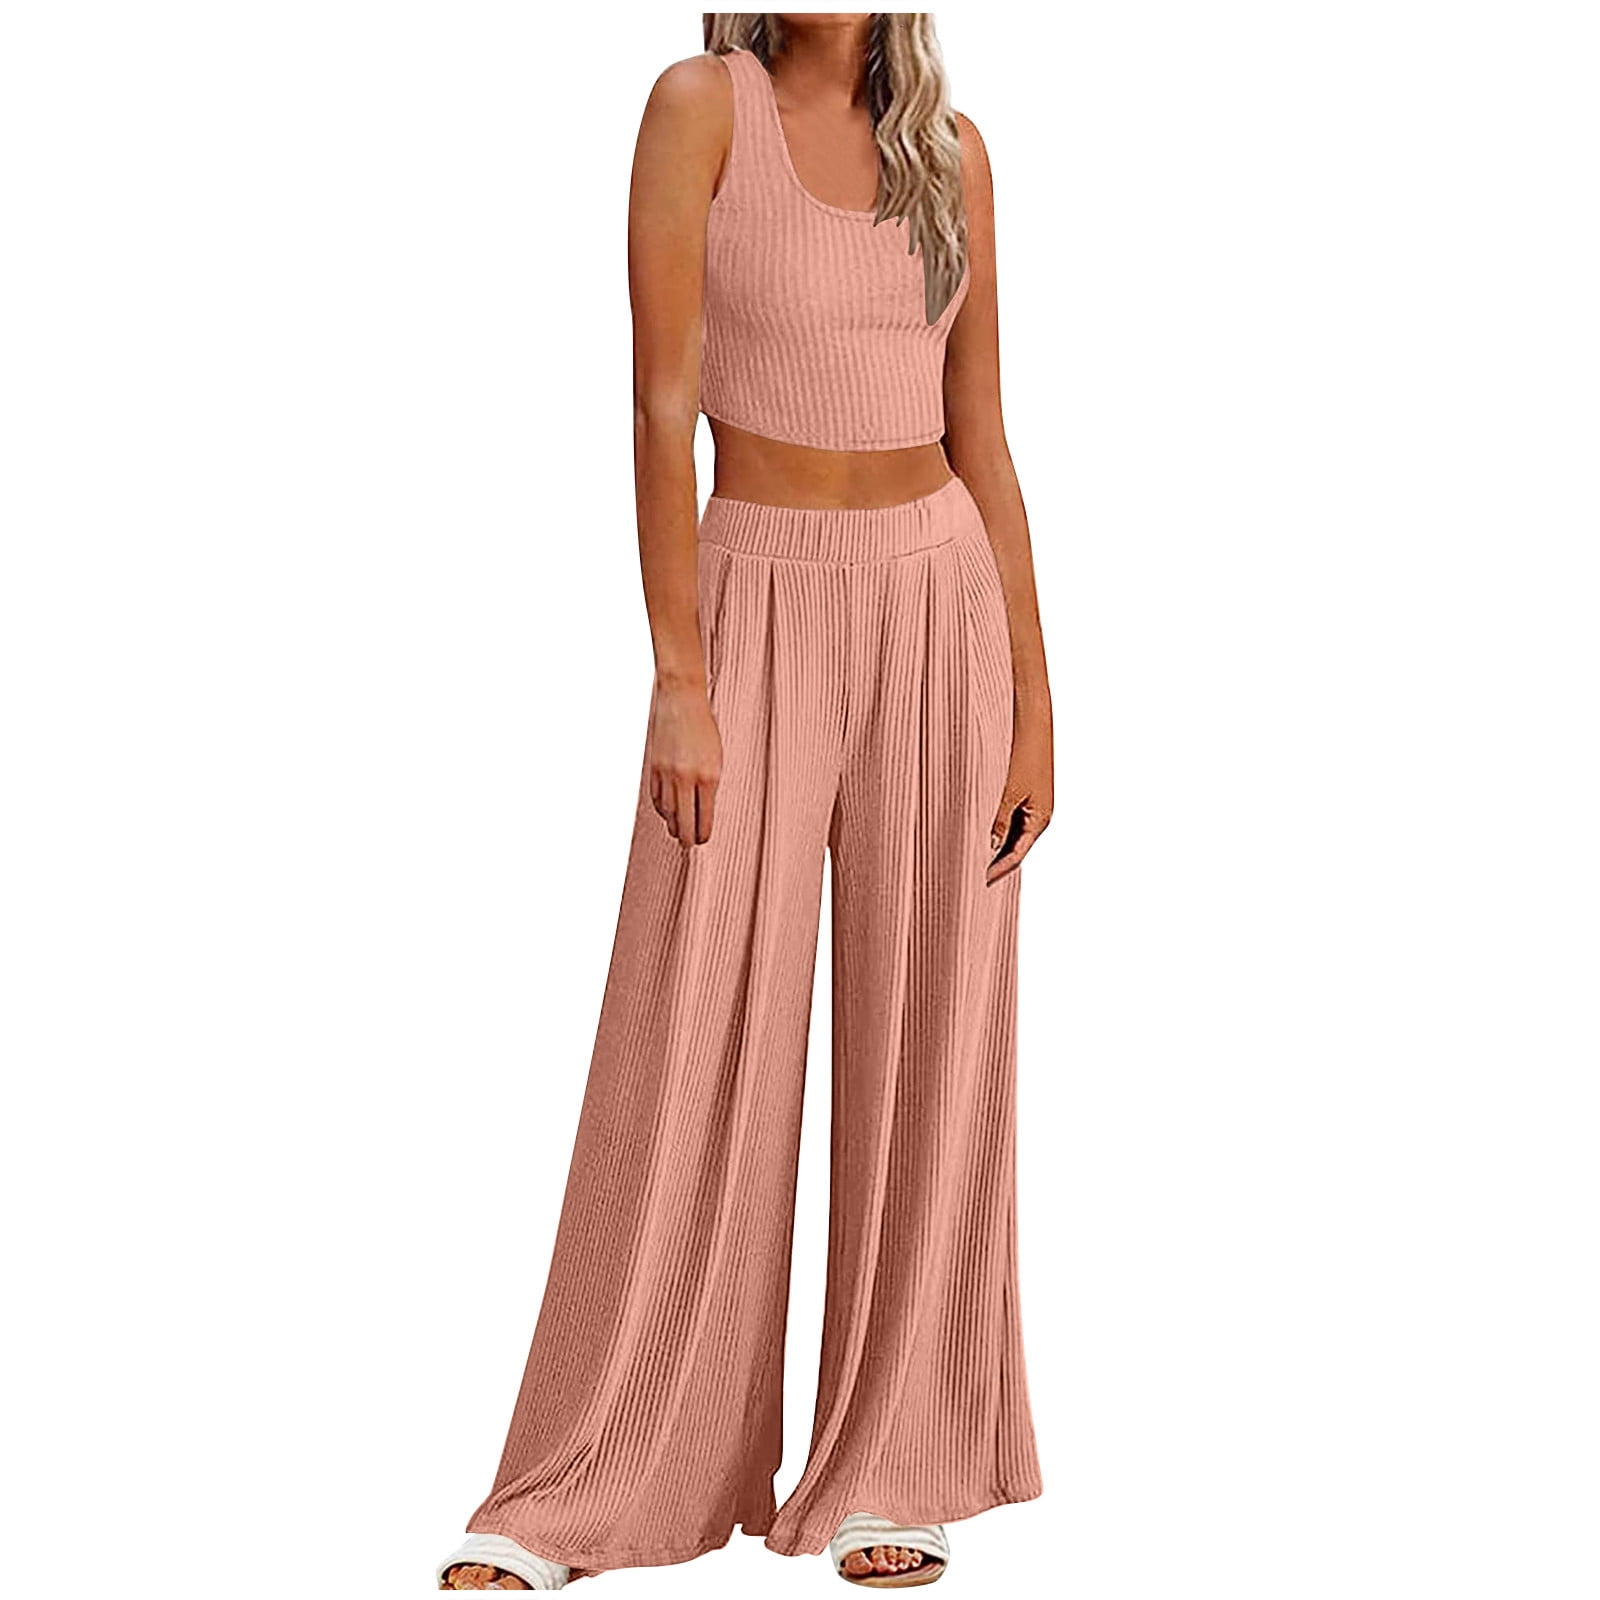 Womens 2 Piece Outfits Sexy Ribbed Knit Sleeveless Crop Top Vest High Waist  Wide Leg Palazzo Pants Party Clubwear 